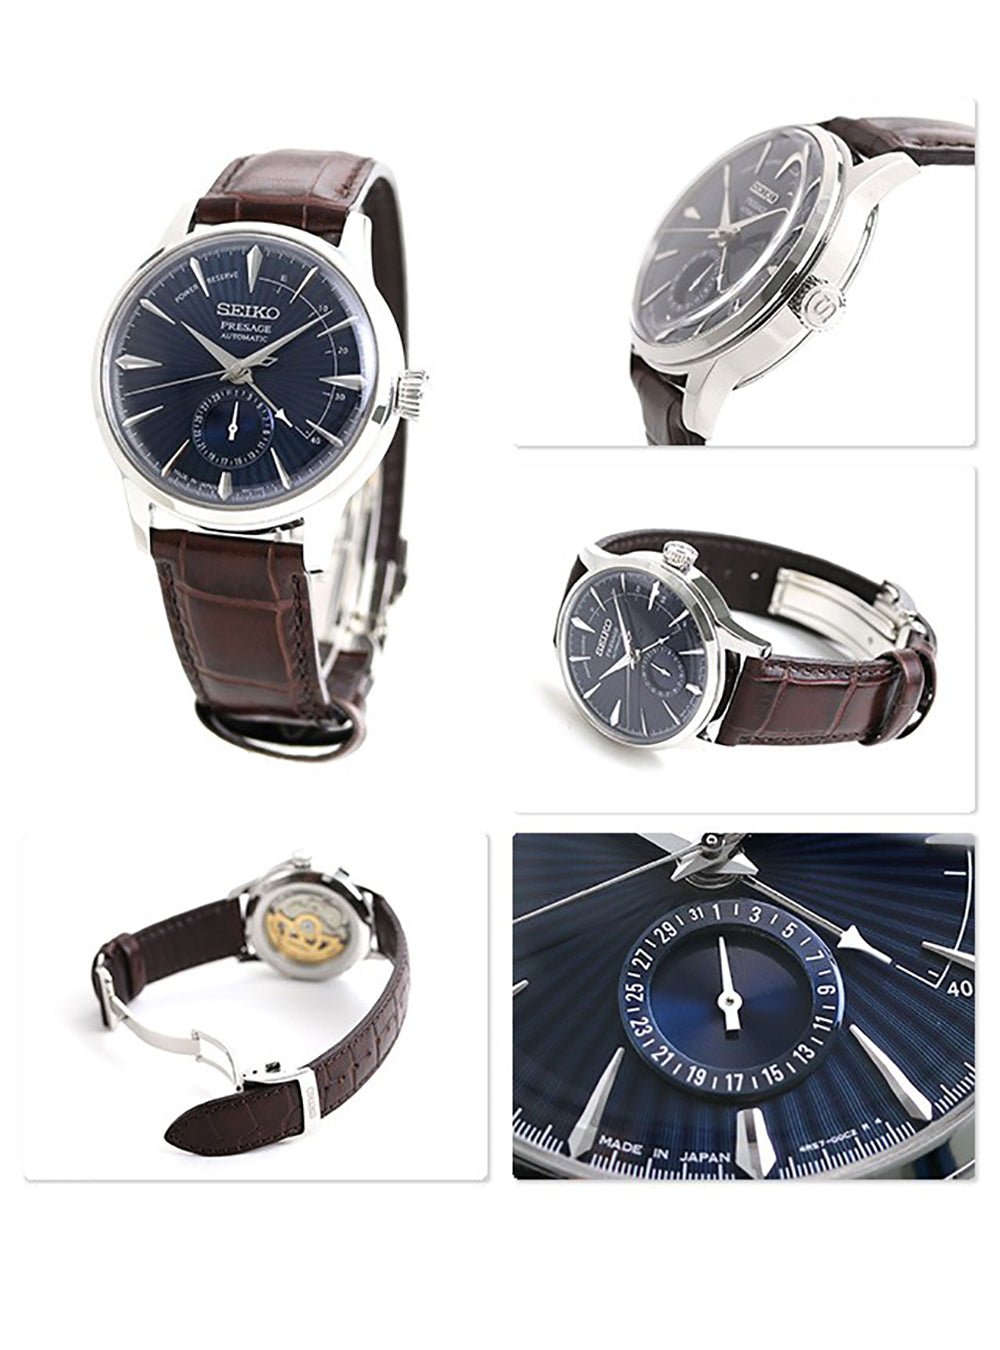 SEIKO PRESAGE Cocktail Time SARY151 LIMITED EDITION MADE IN JAPAN JDM (Japanese Domestic Market)WRISTWATCHjapan-select